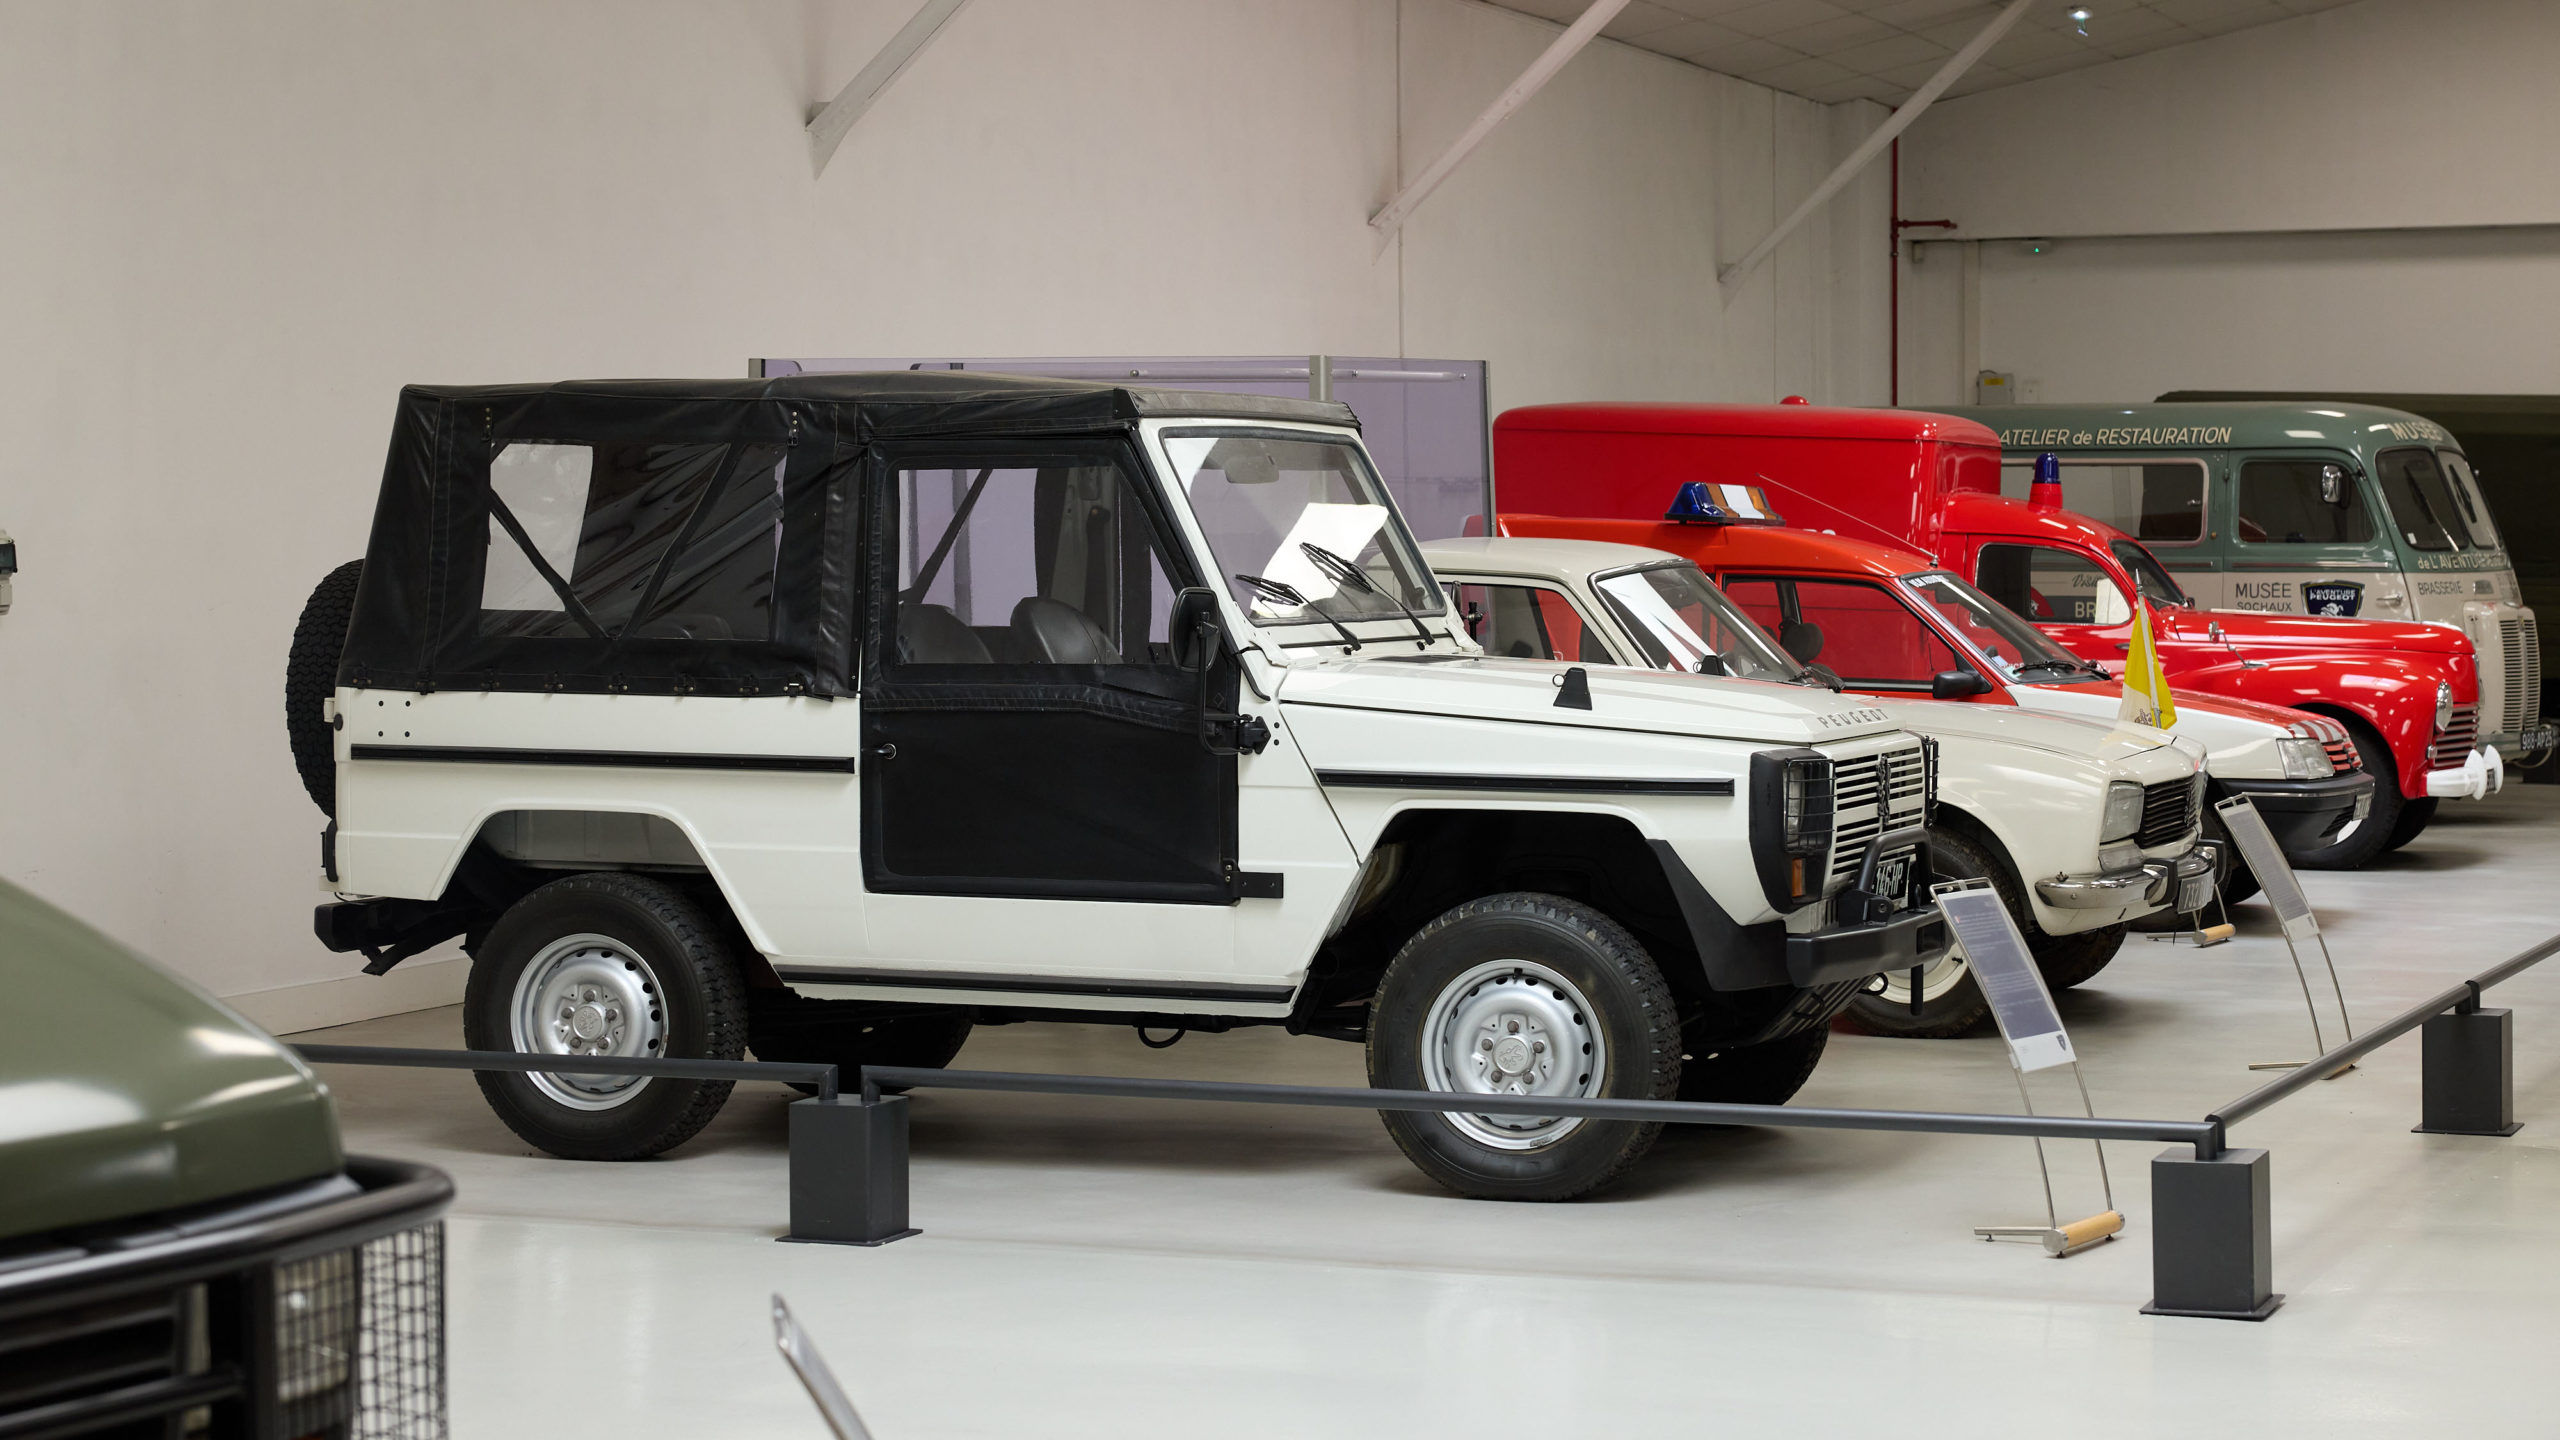 join us for a snap tour of the peugeot museum